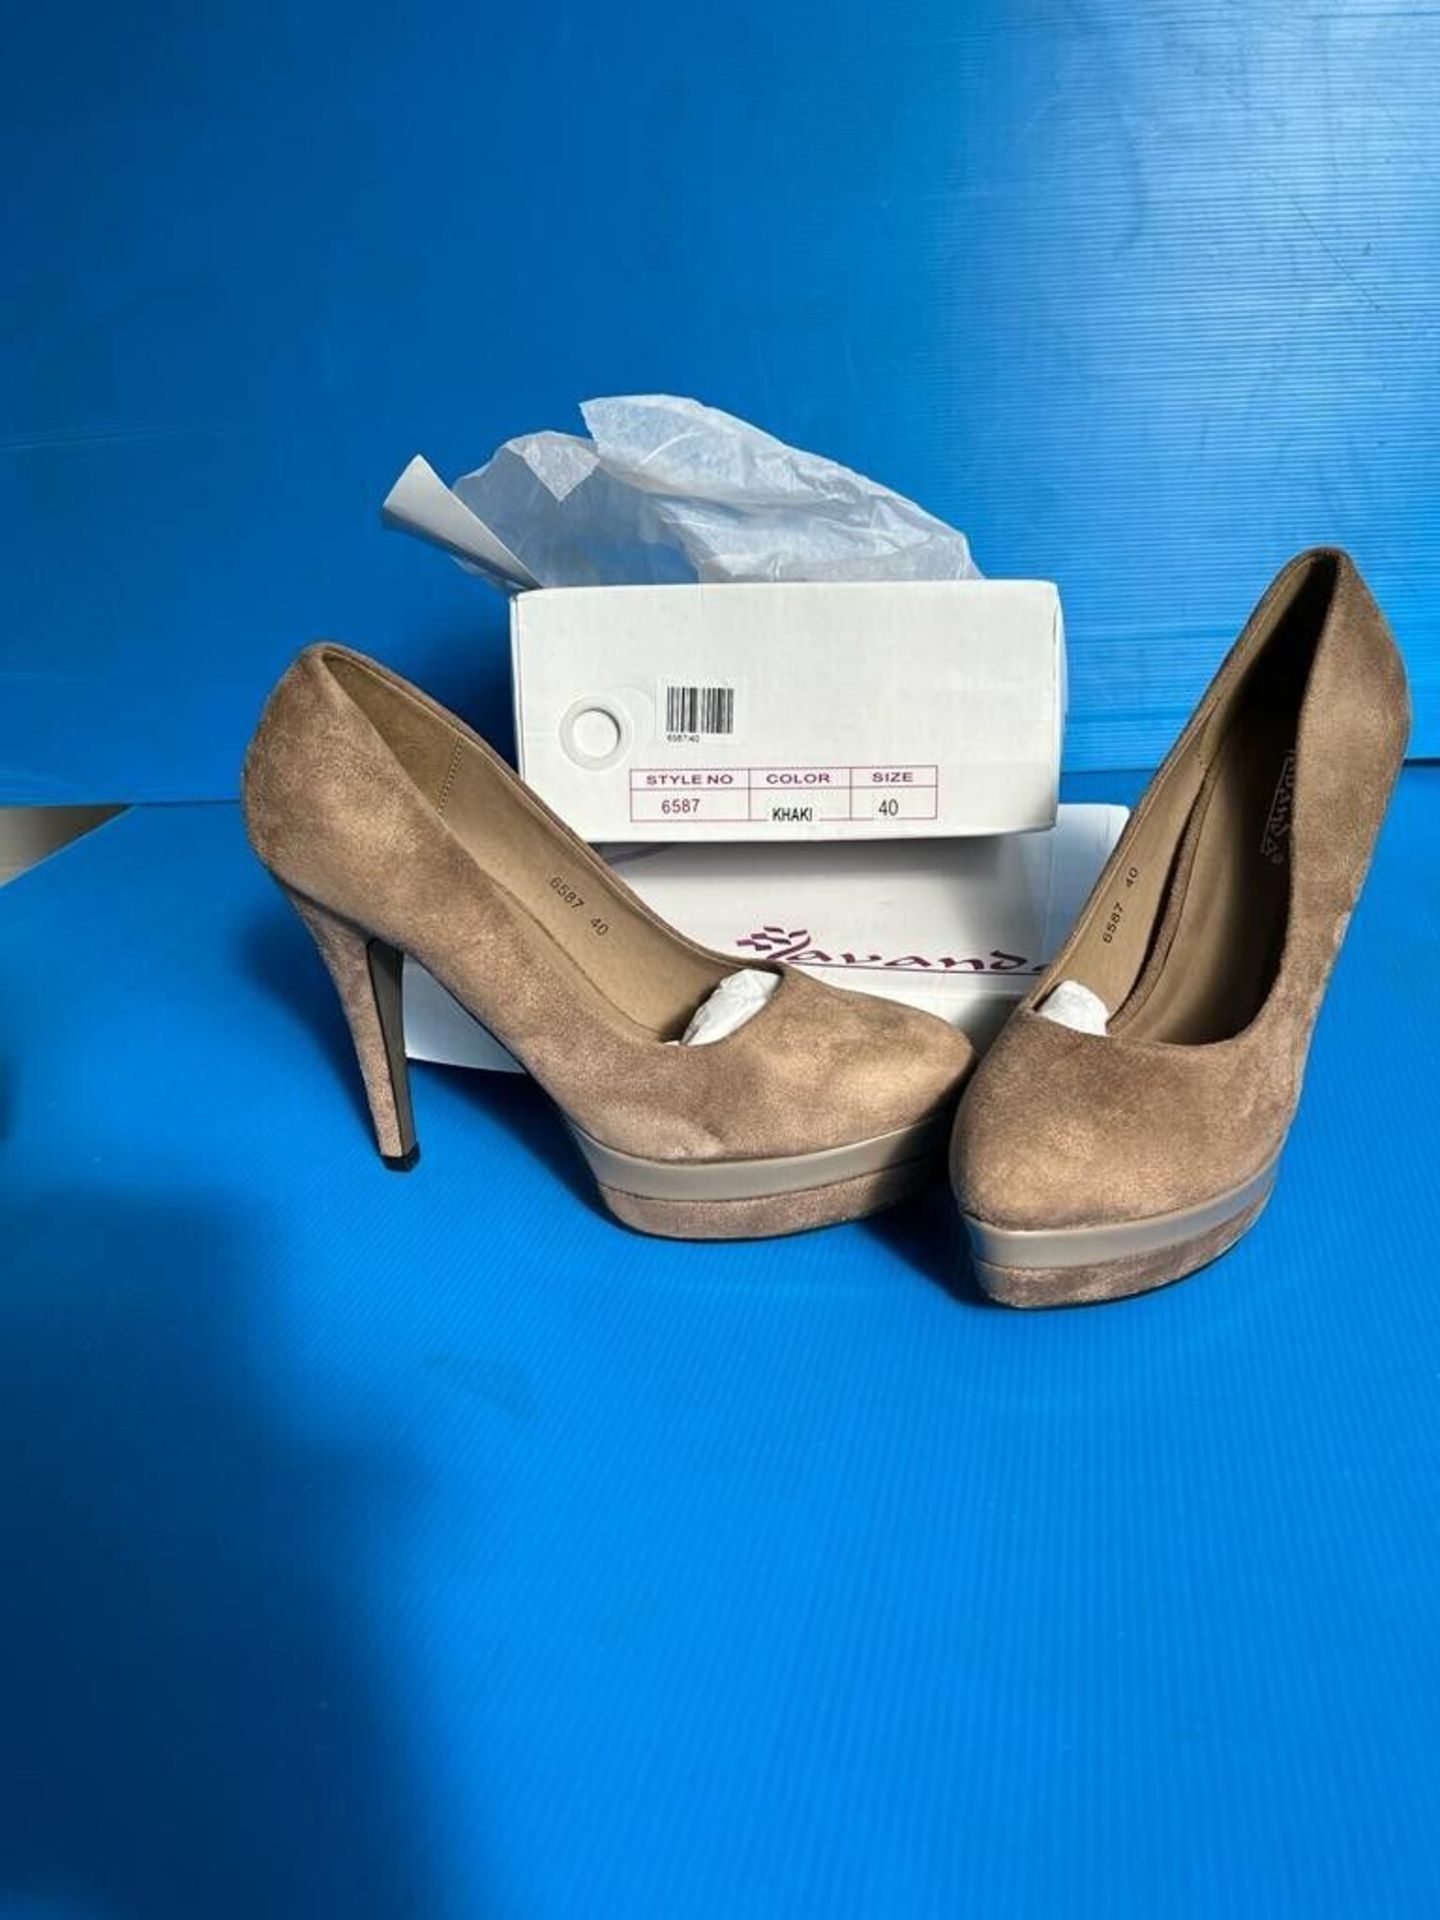 X100 BRAND NEW PAIRS WOMENS HIGH HEELS - MIXED STYLES AND SIZES RRP £3000 - Image 12 of 13